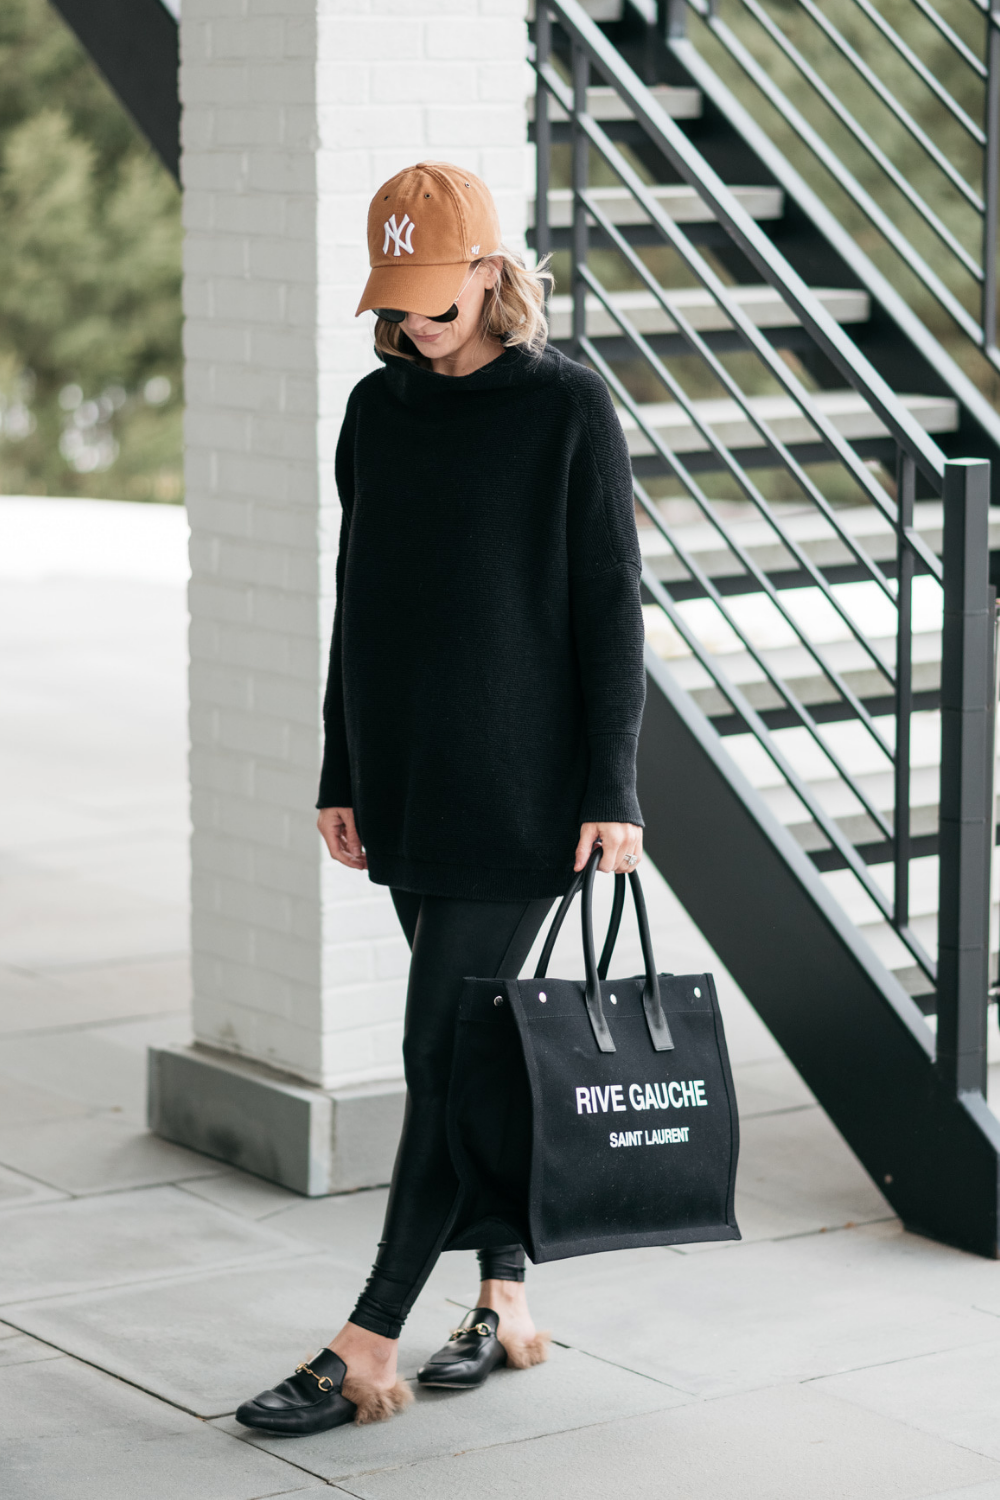 Suzanne wearing a tunic, faux leather leggings, a baseball cap, tote, and mules